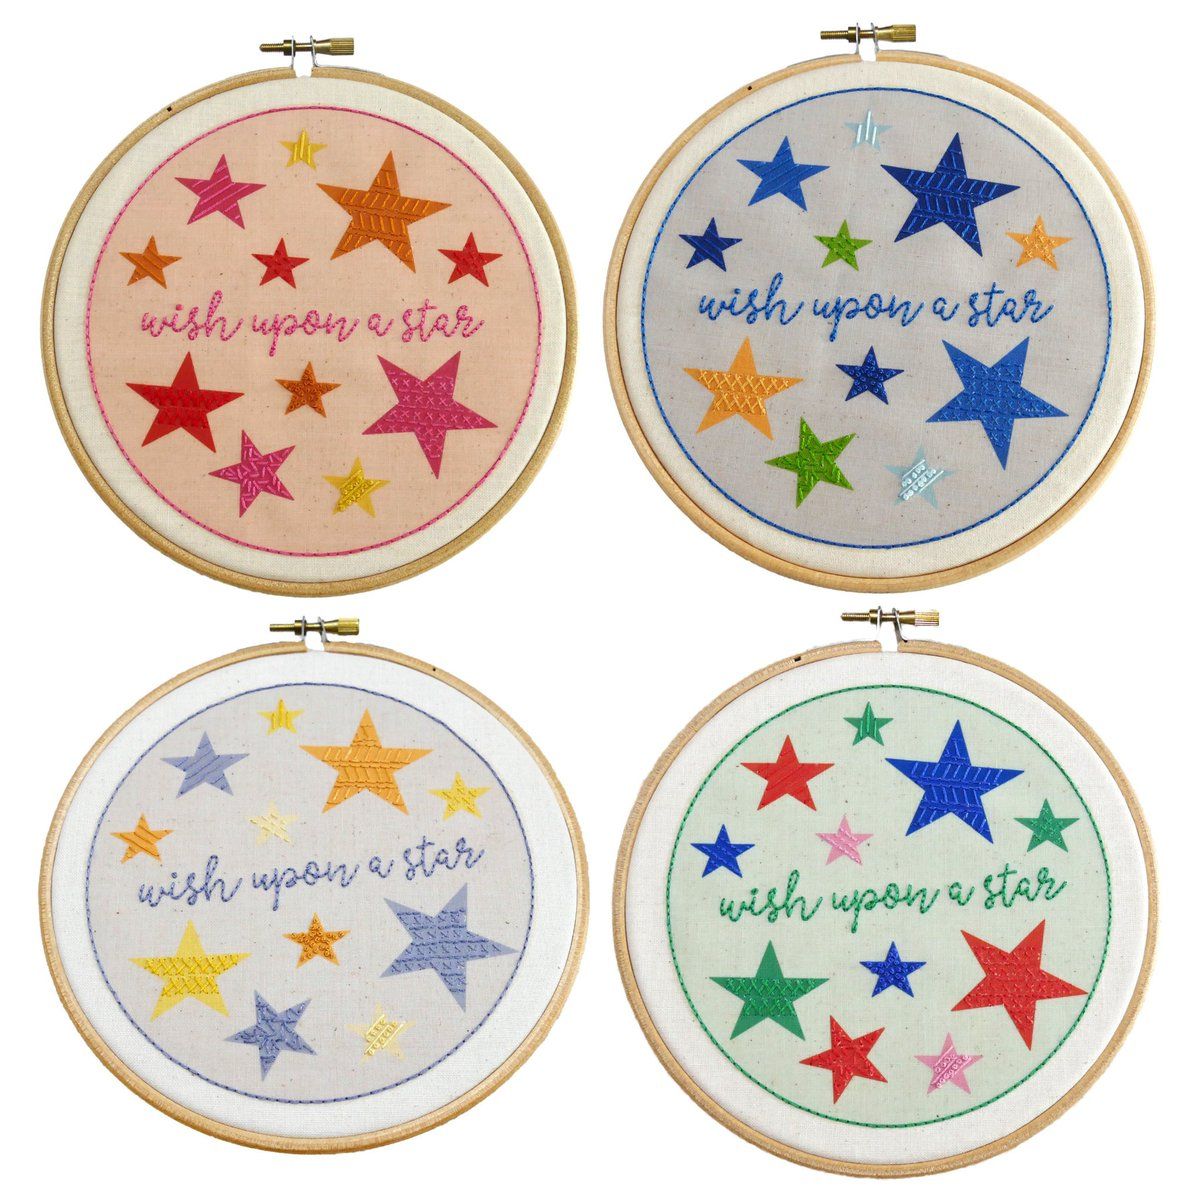 Hand Embroidery Patterns Baby Adultcraftkits Hashtag On Twitter